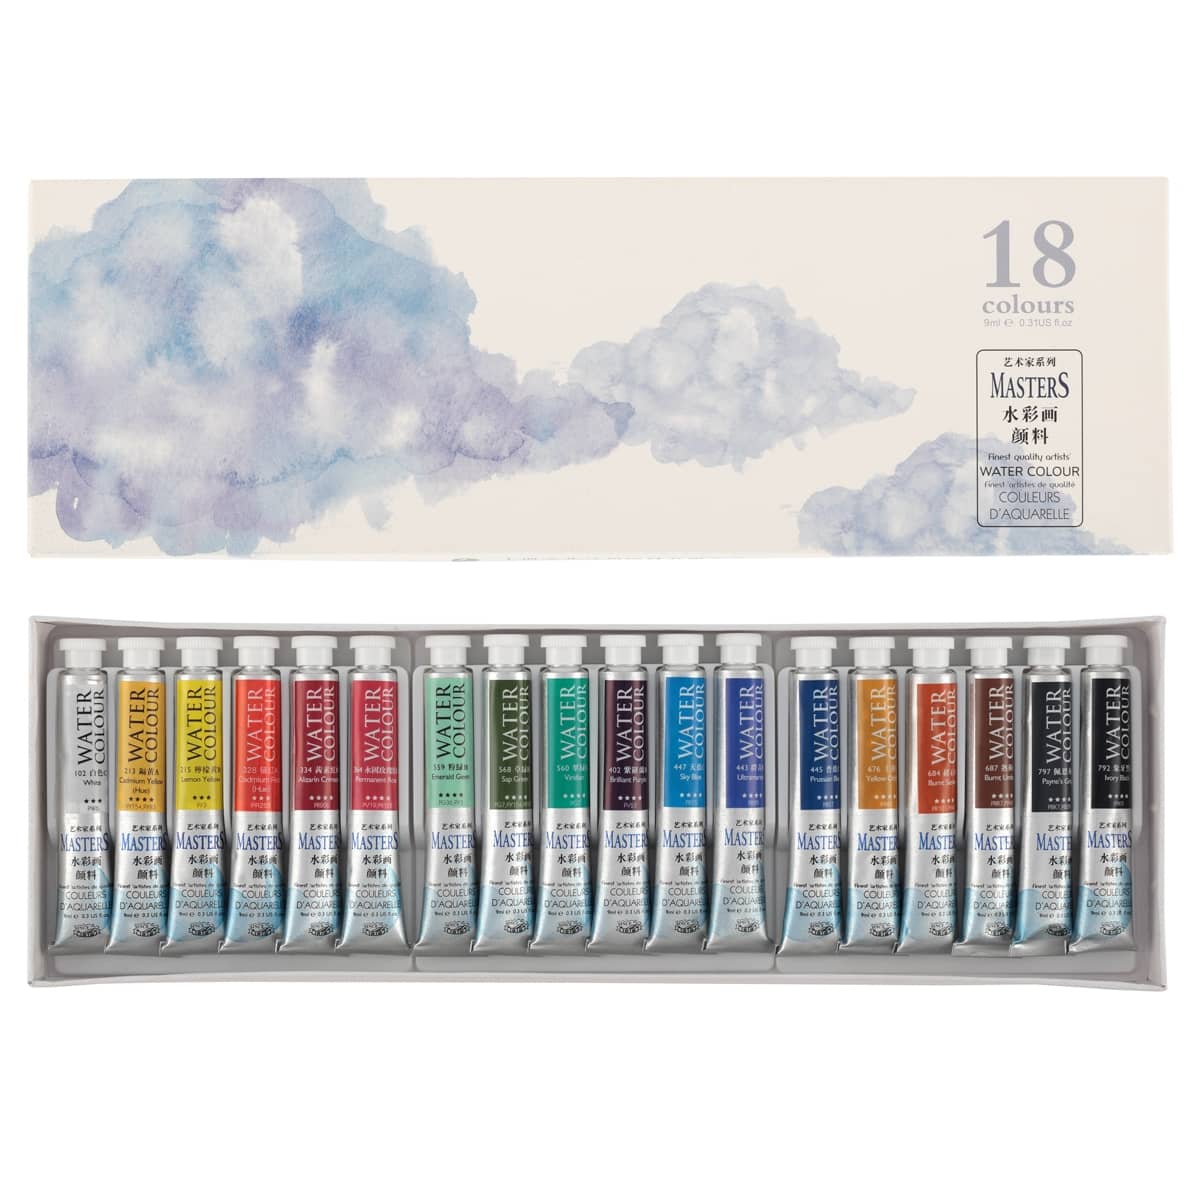 Marie's Master Quality Watercolor Set of 18, 9ml Tubes